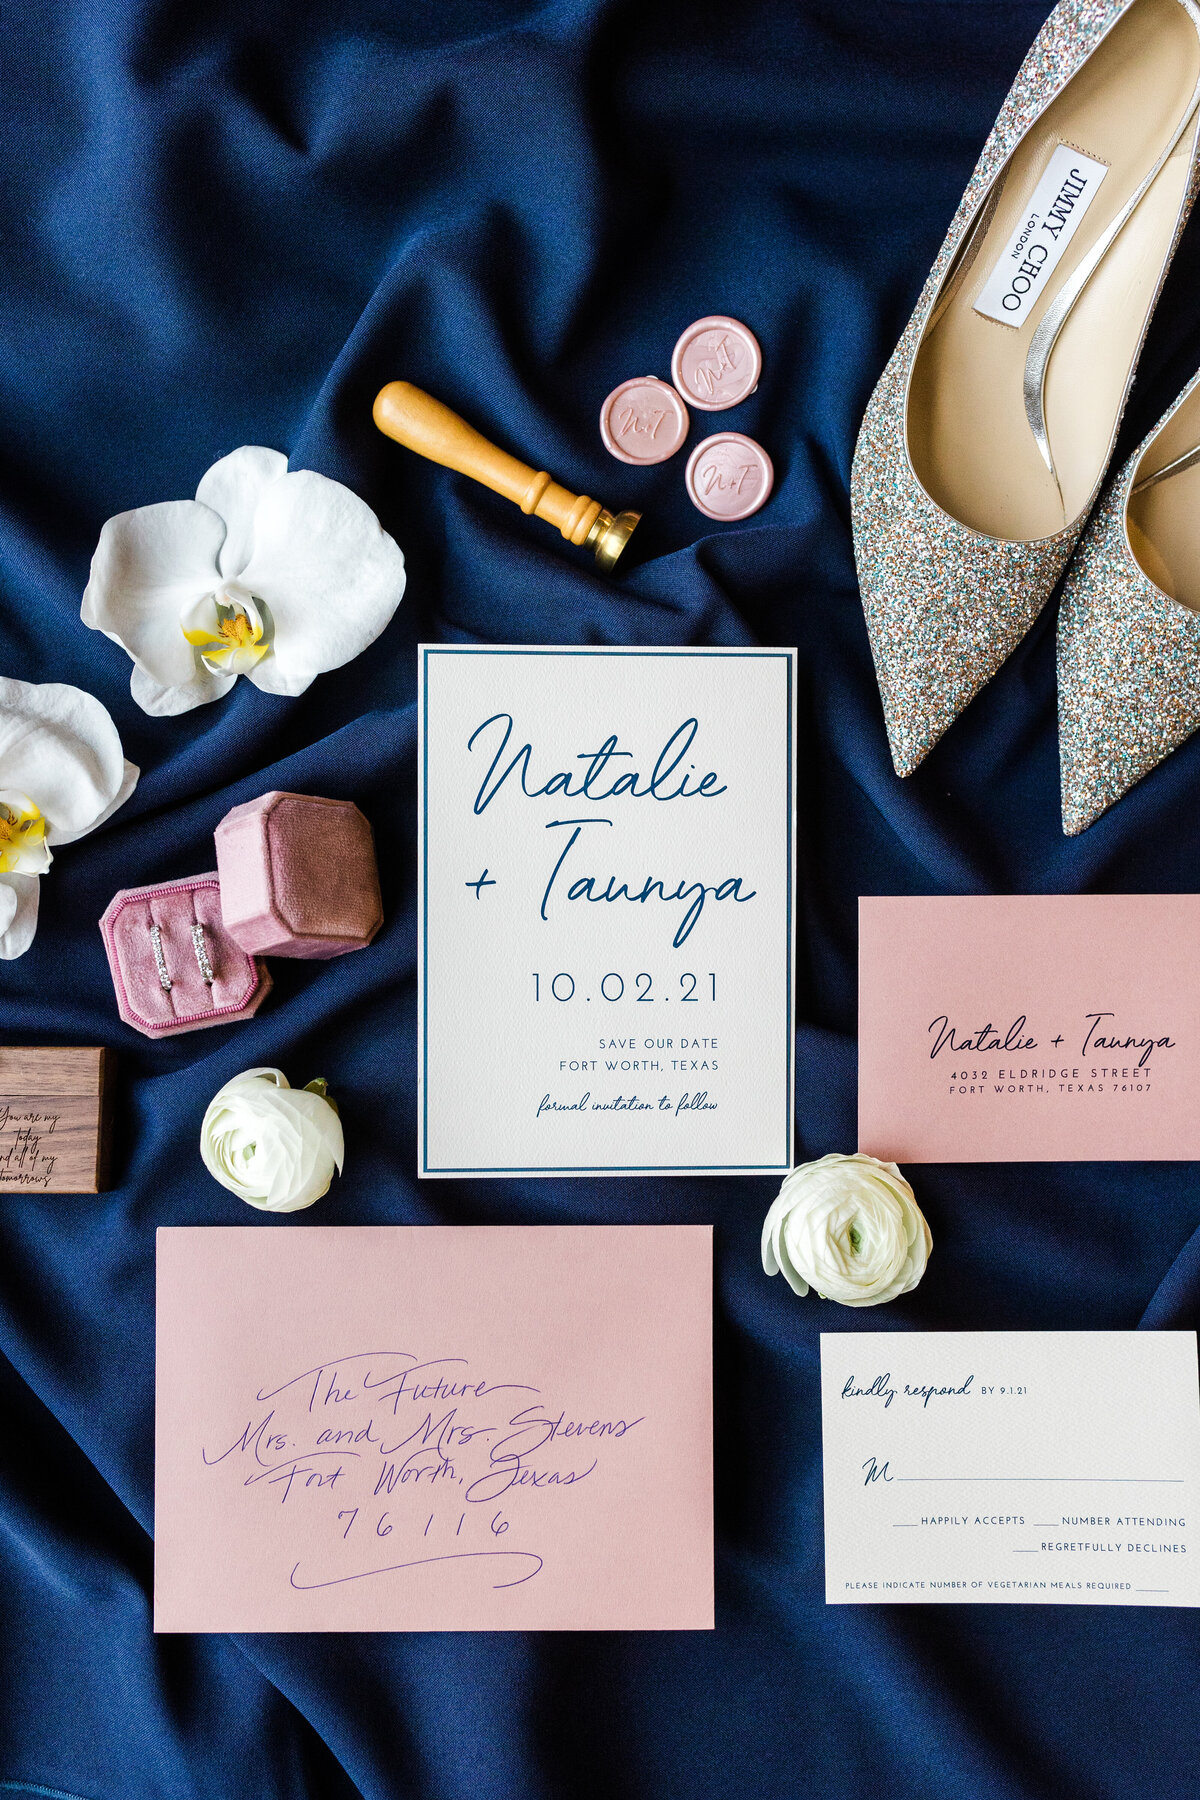 A flat lay detail shot of two brides' invitation, shoes, wax seal and sealer, flowers, rings and their ring box, and RSVP all resting on a dark blue sheet.